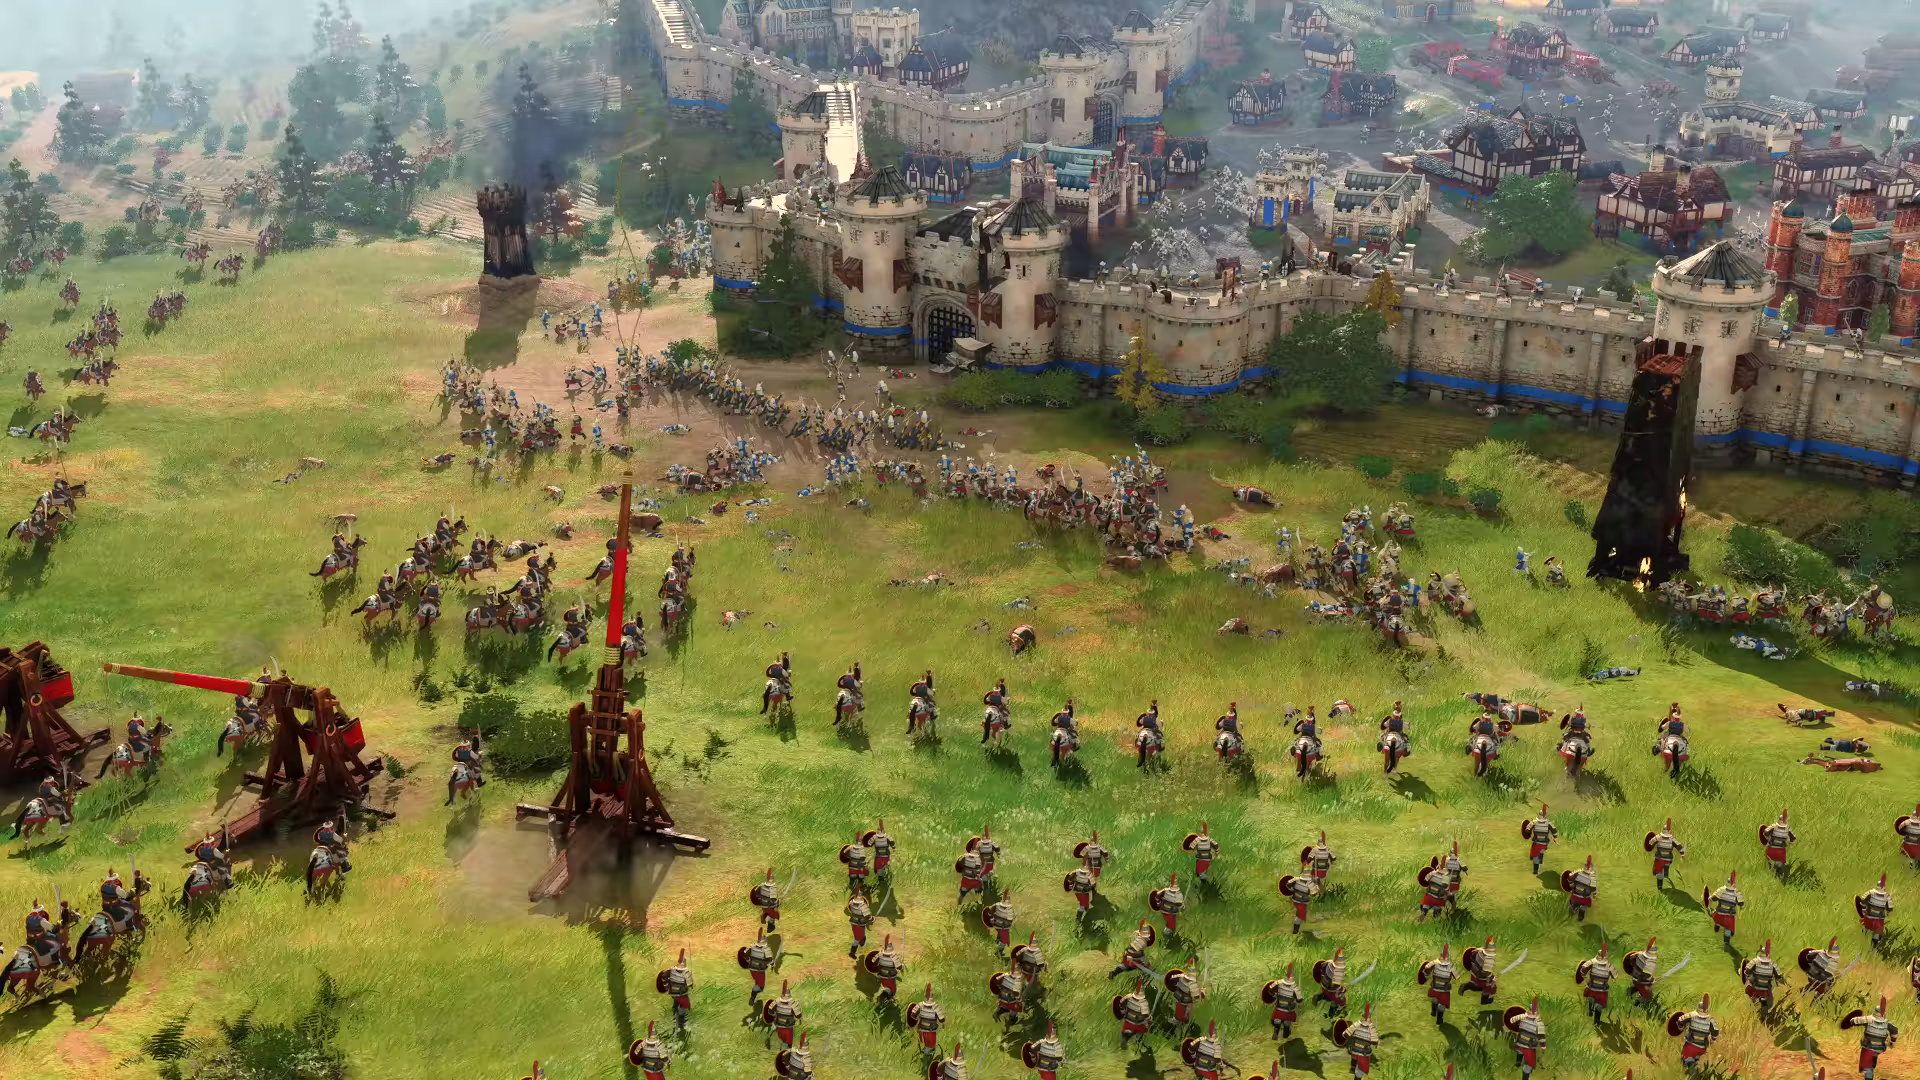 age of empires 4 release date time